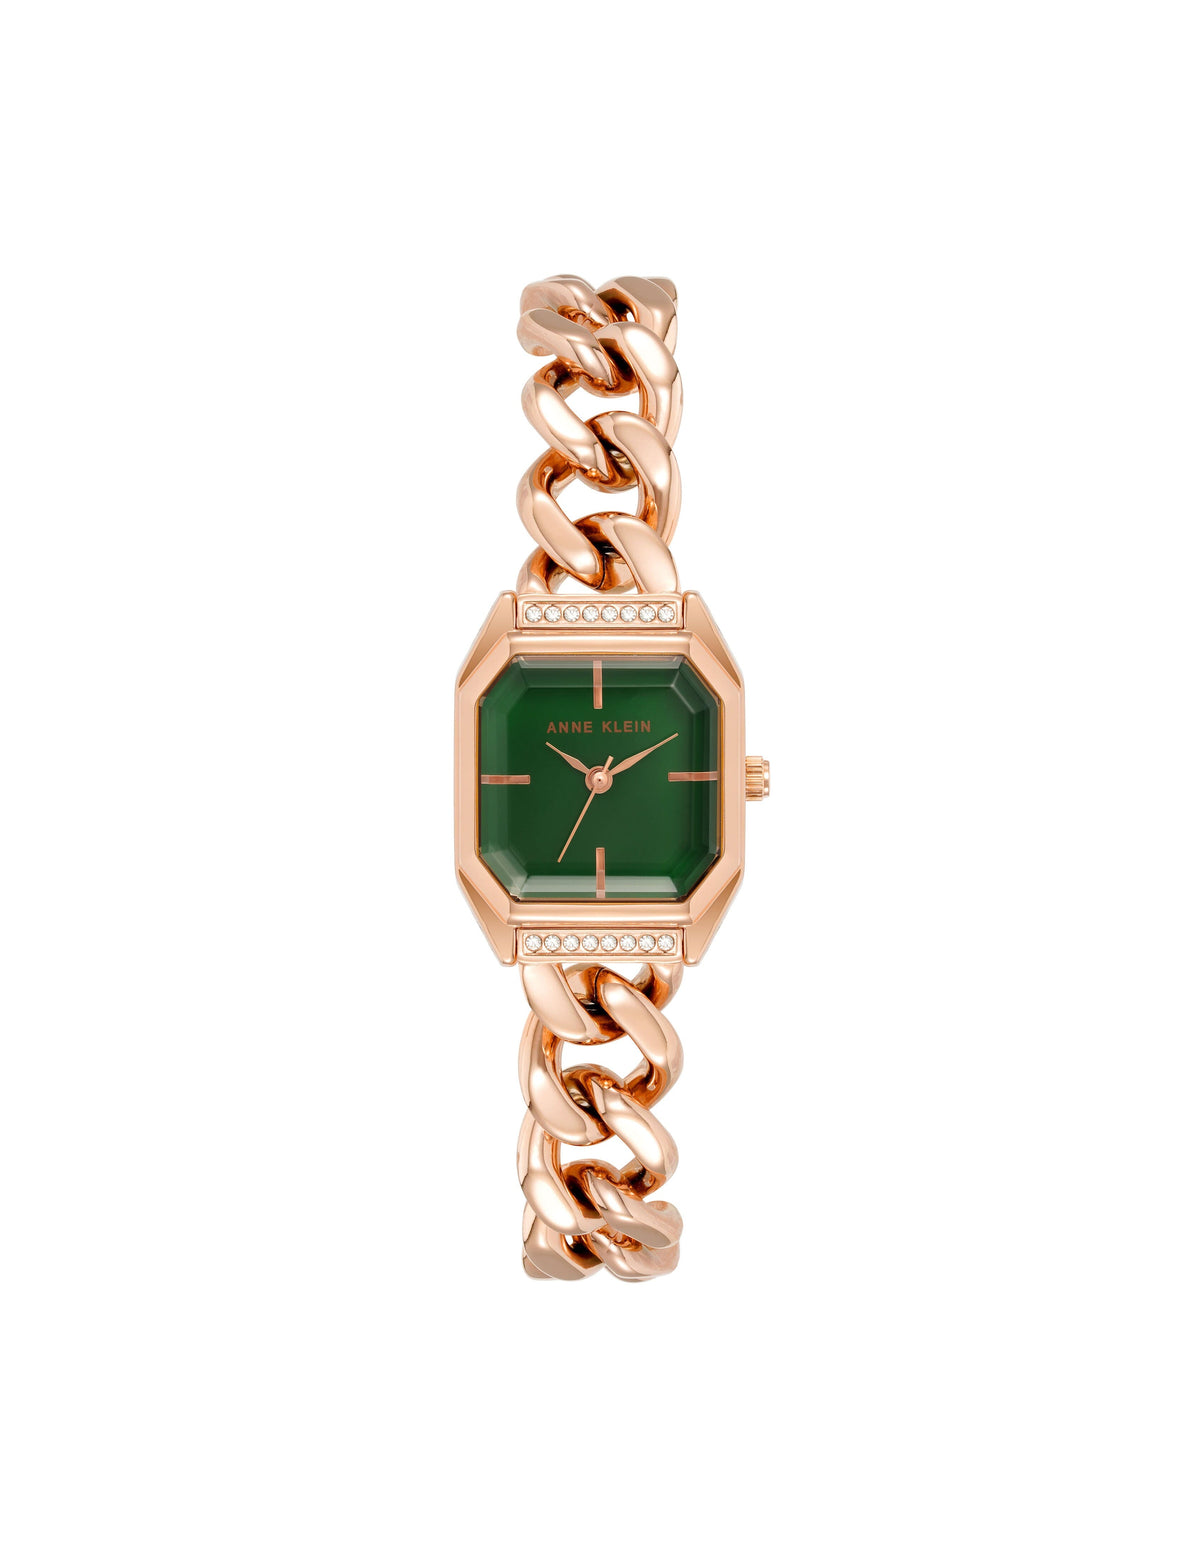 Anne Klein Rose Gold-Tone/ Green Octagonal Crystal Accented Chain Bracelet Watch